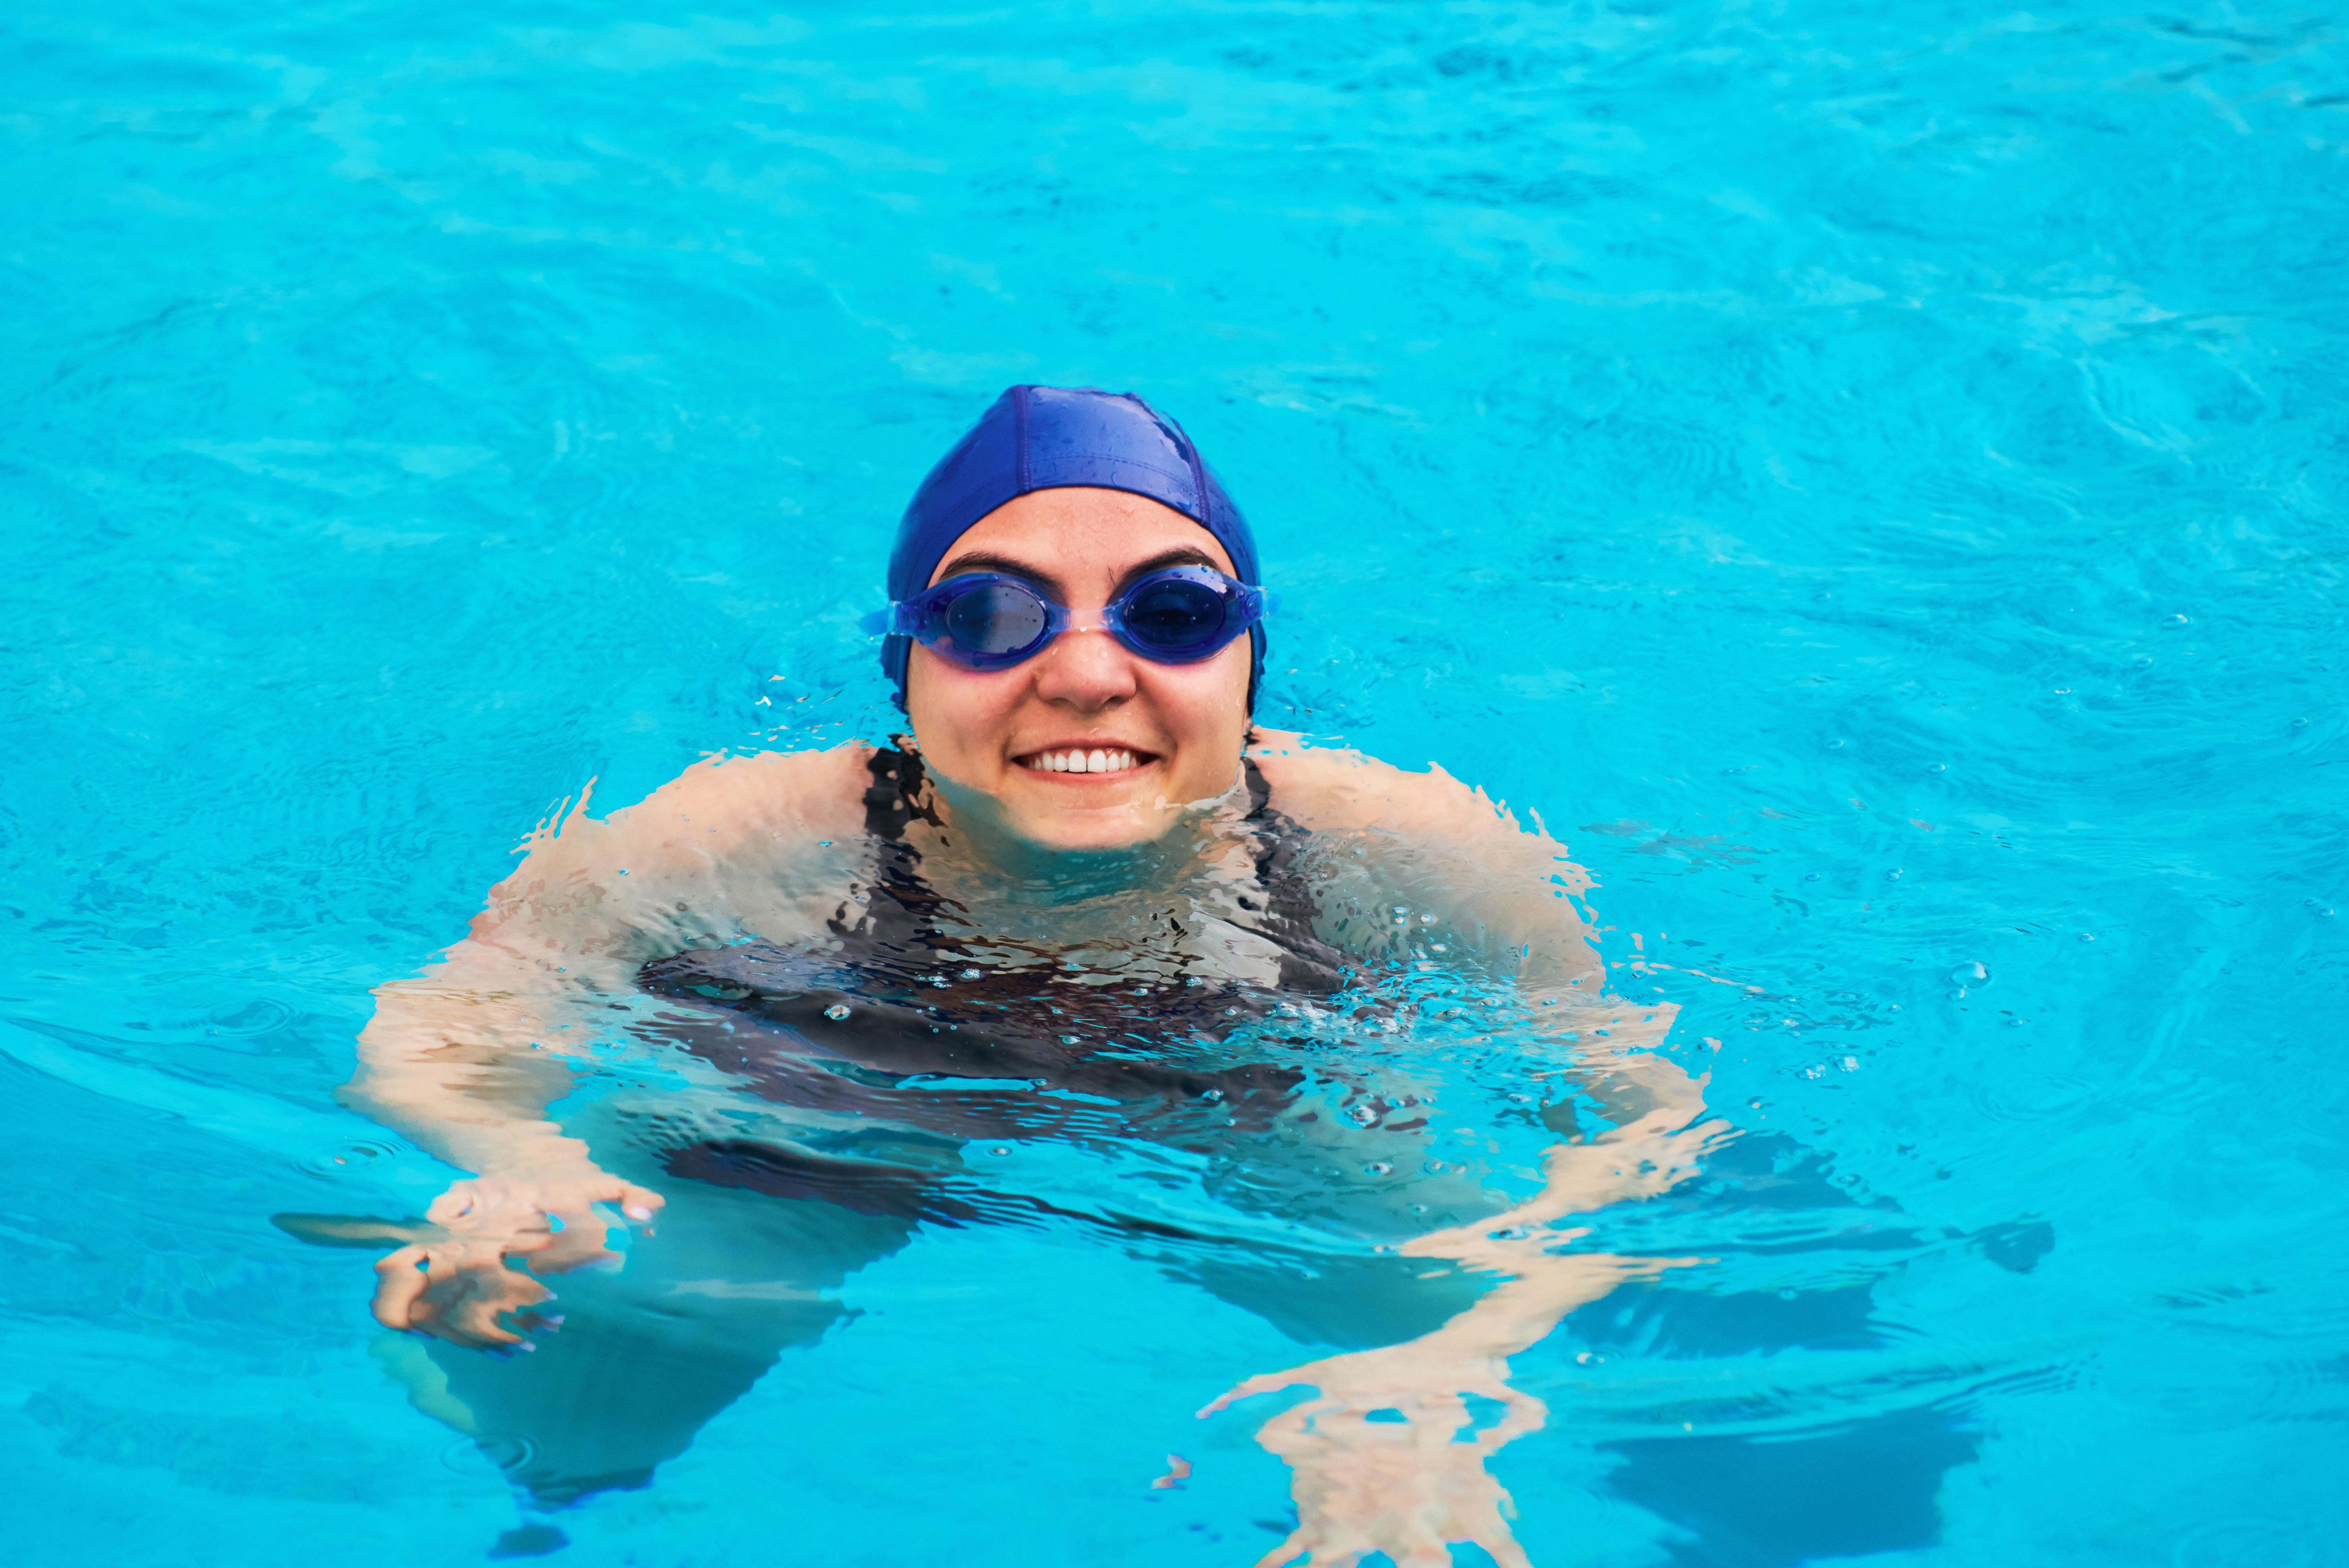 Woman in a swimming pool, smiling at the camera, wearing goggles and a blue swim cap